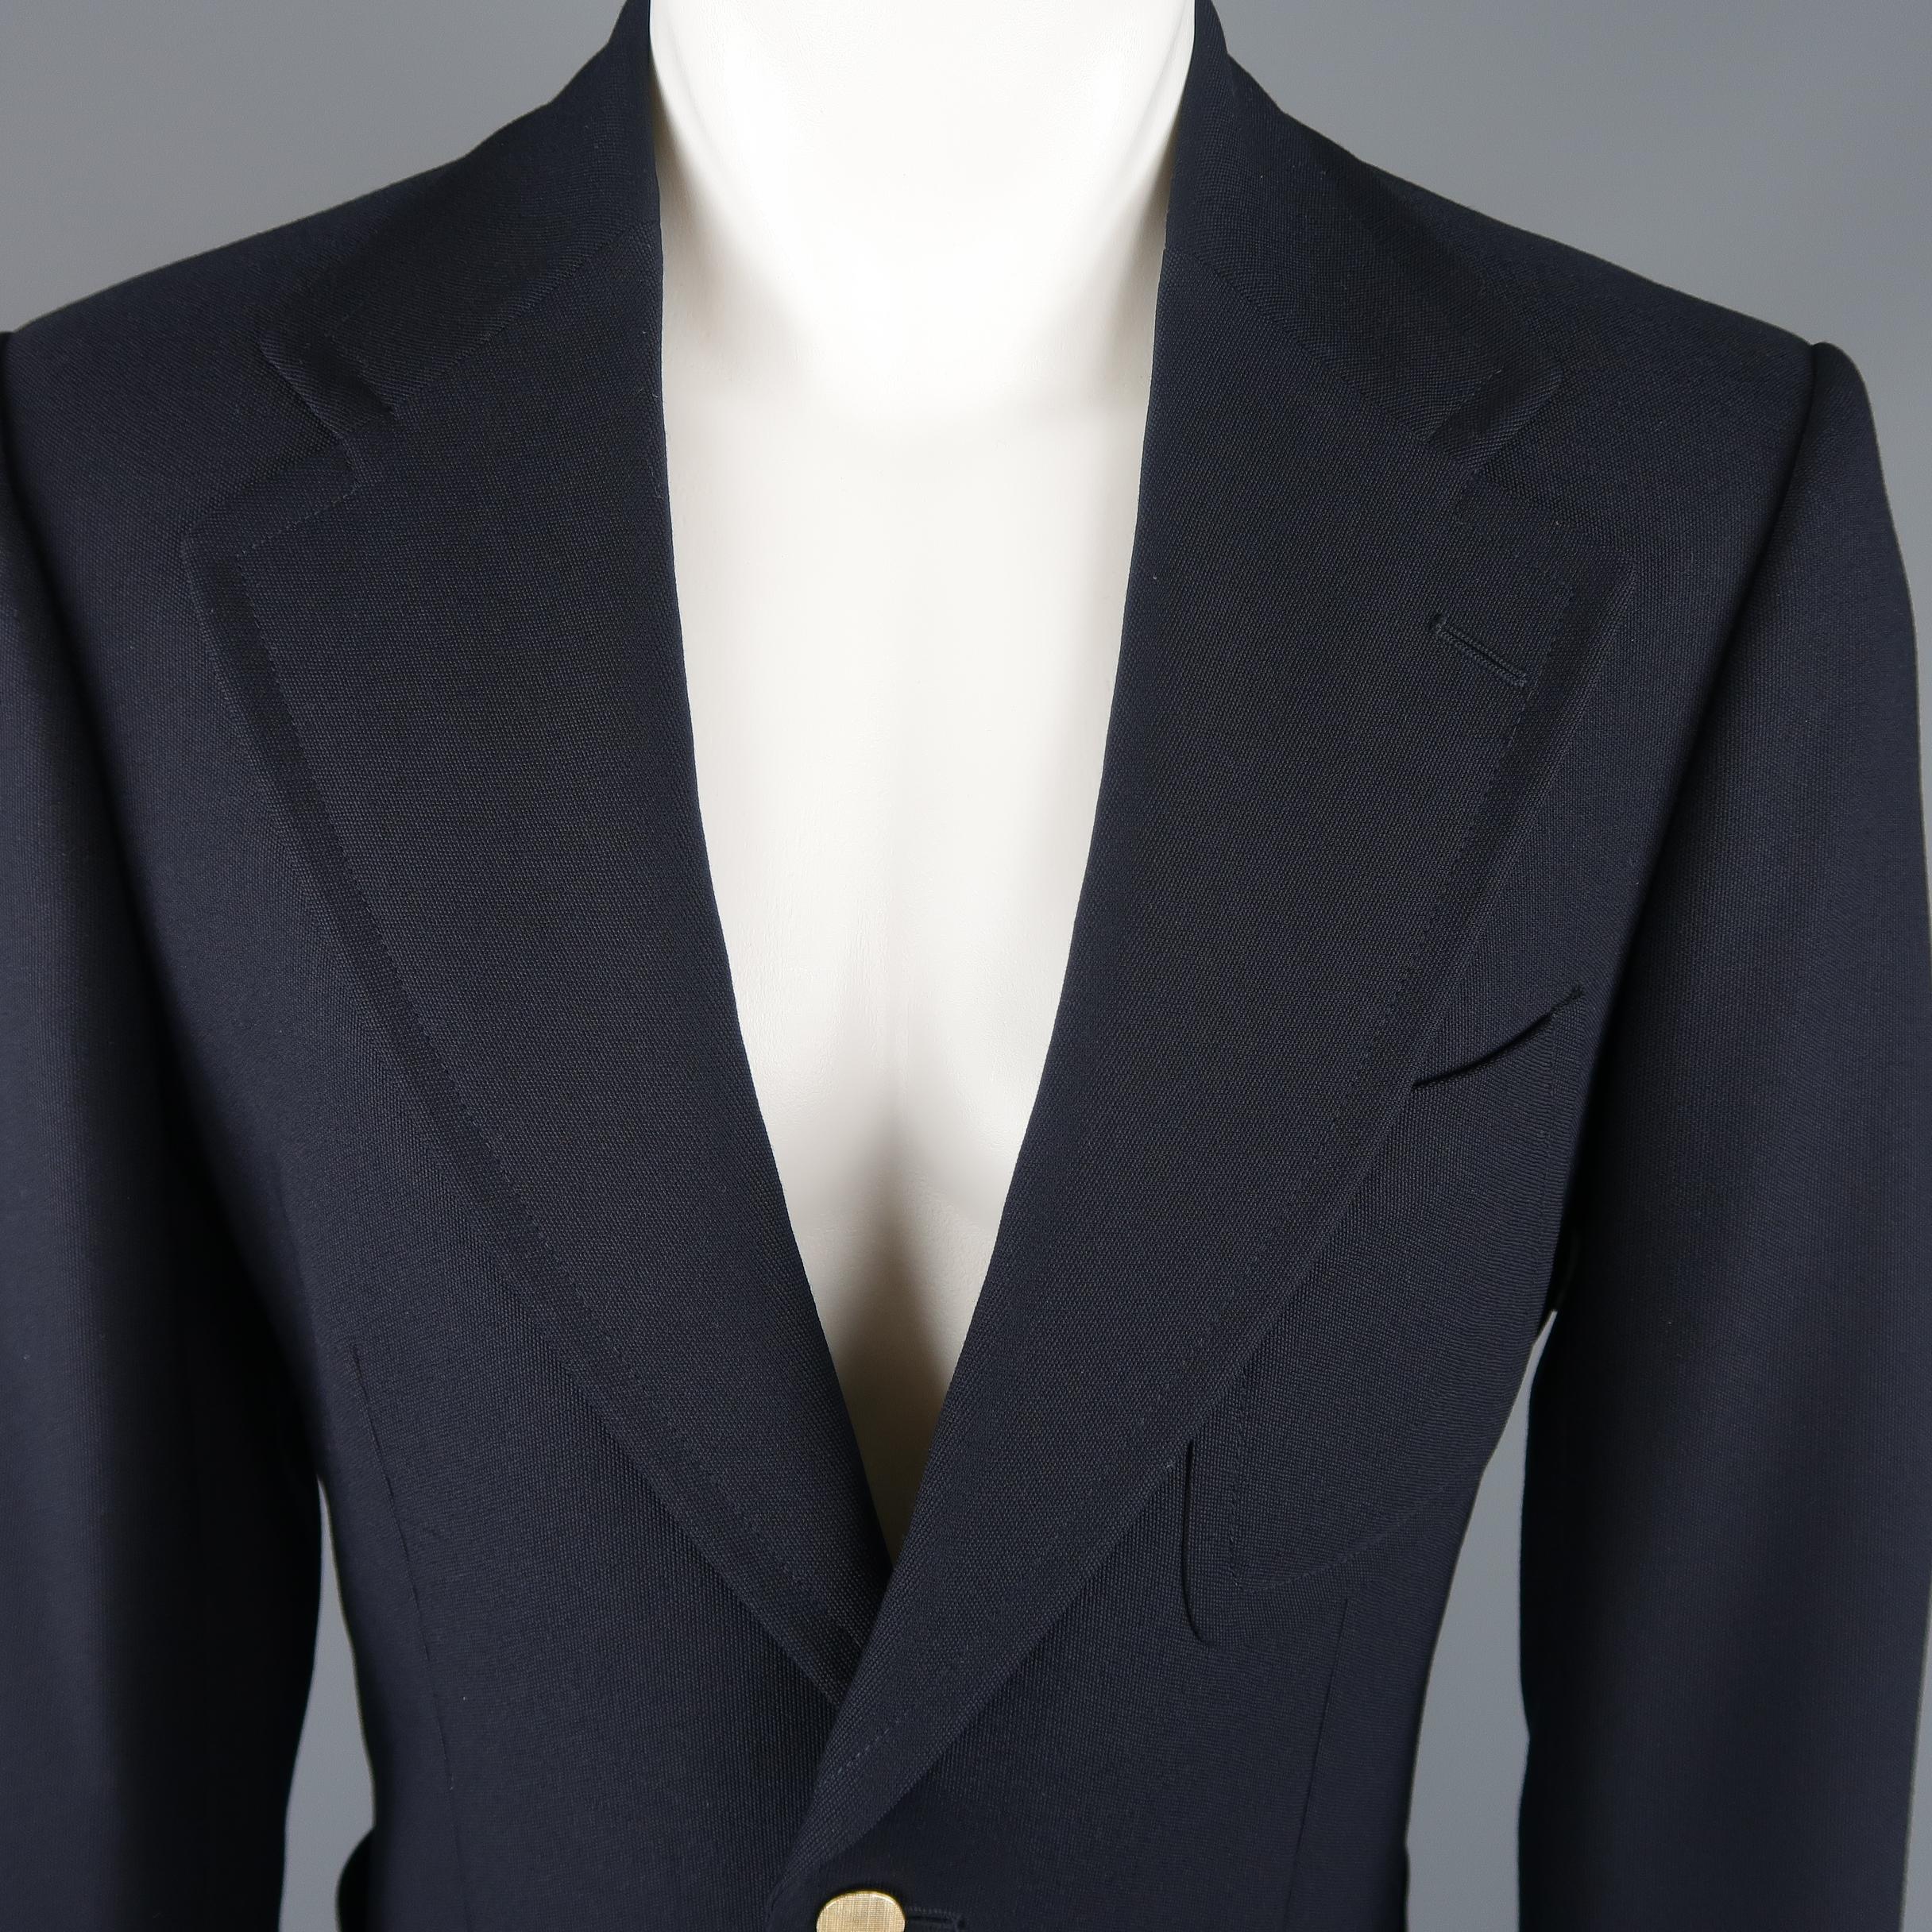 Archive GUCCI by TOM FORD single breasted sort coat comes in navy wool canvas with a wide notch lapel, patch pockets, and metal buttons. Made in Italy.
 
Excellent Pre-Owned Condition.
Marked: IT 48
 
Measurements:
 

    Shoulder: 18 in.
    Chest: